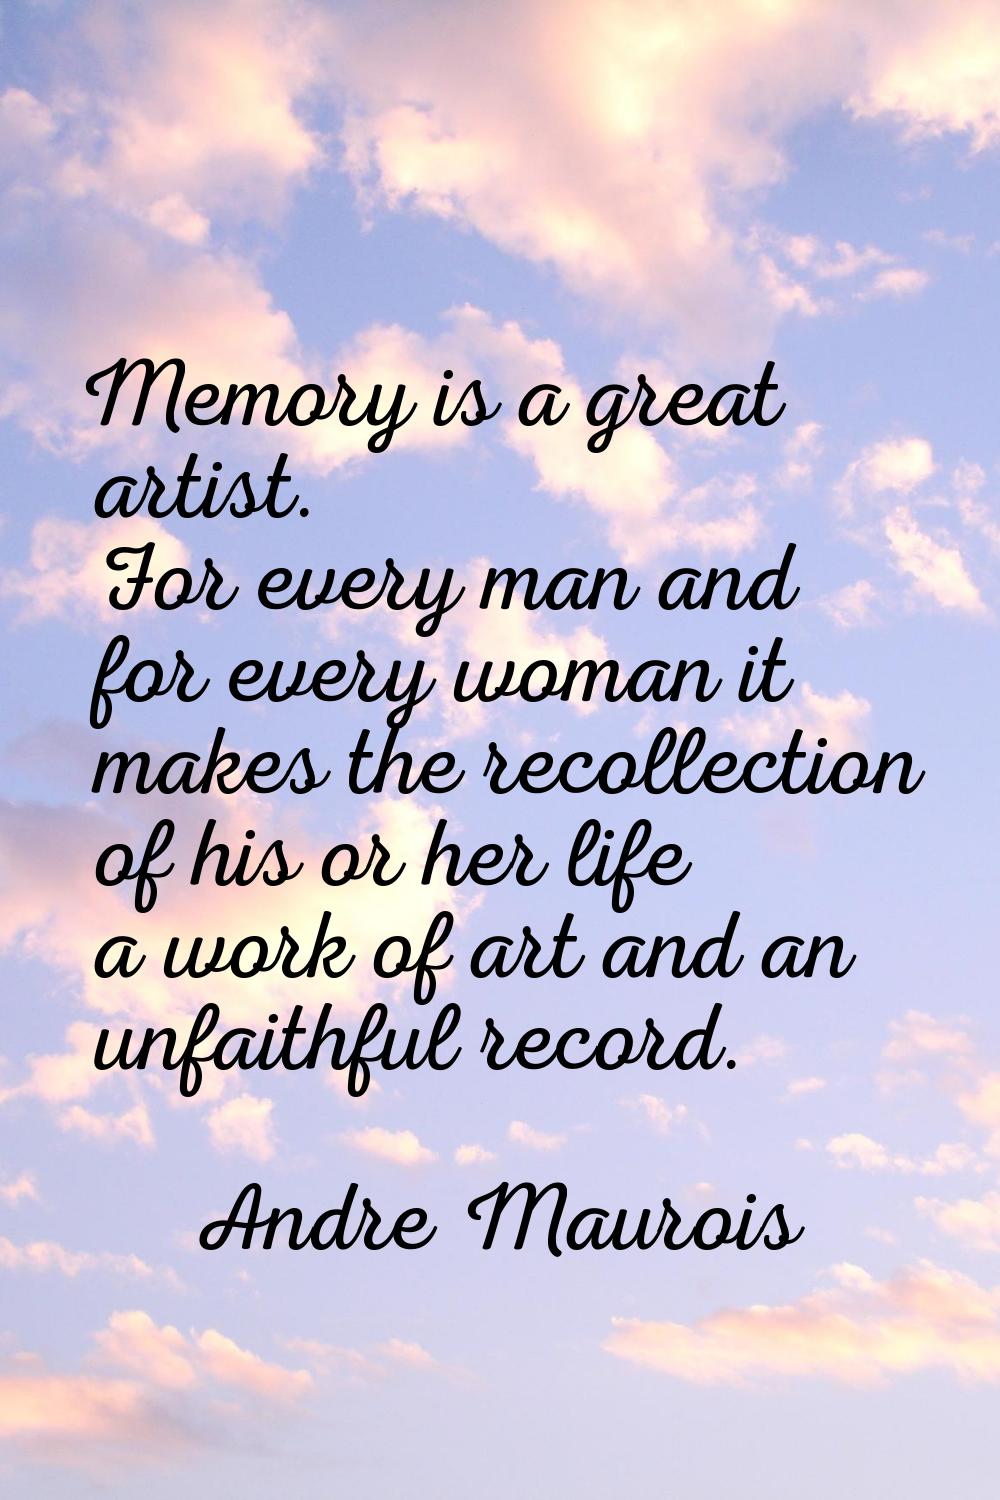 Memory is a great artist. For every man and for every woman it makes the recollection of his or her